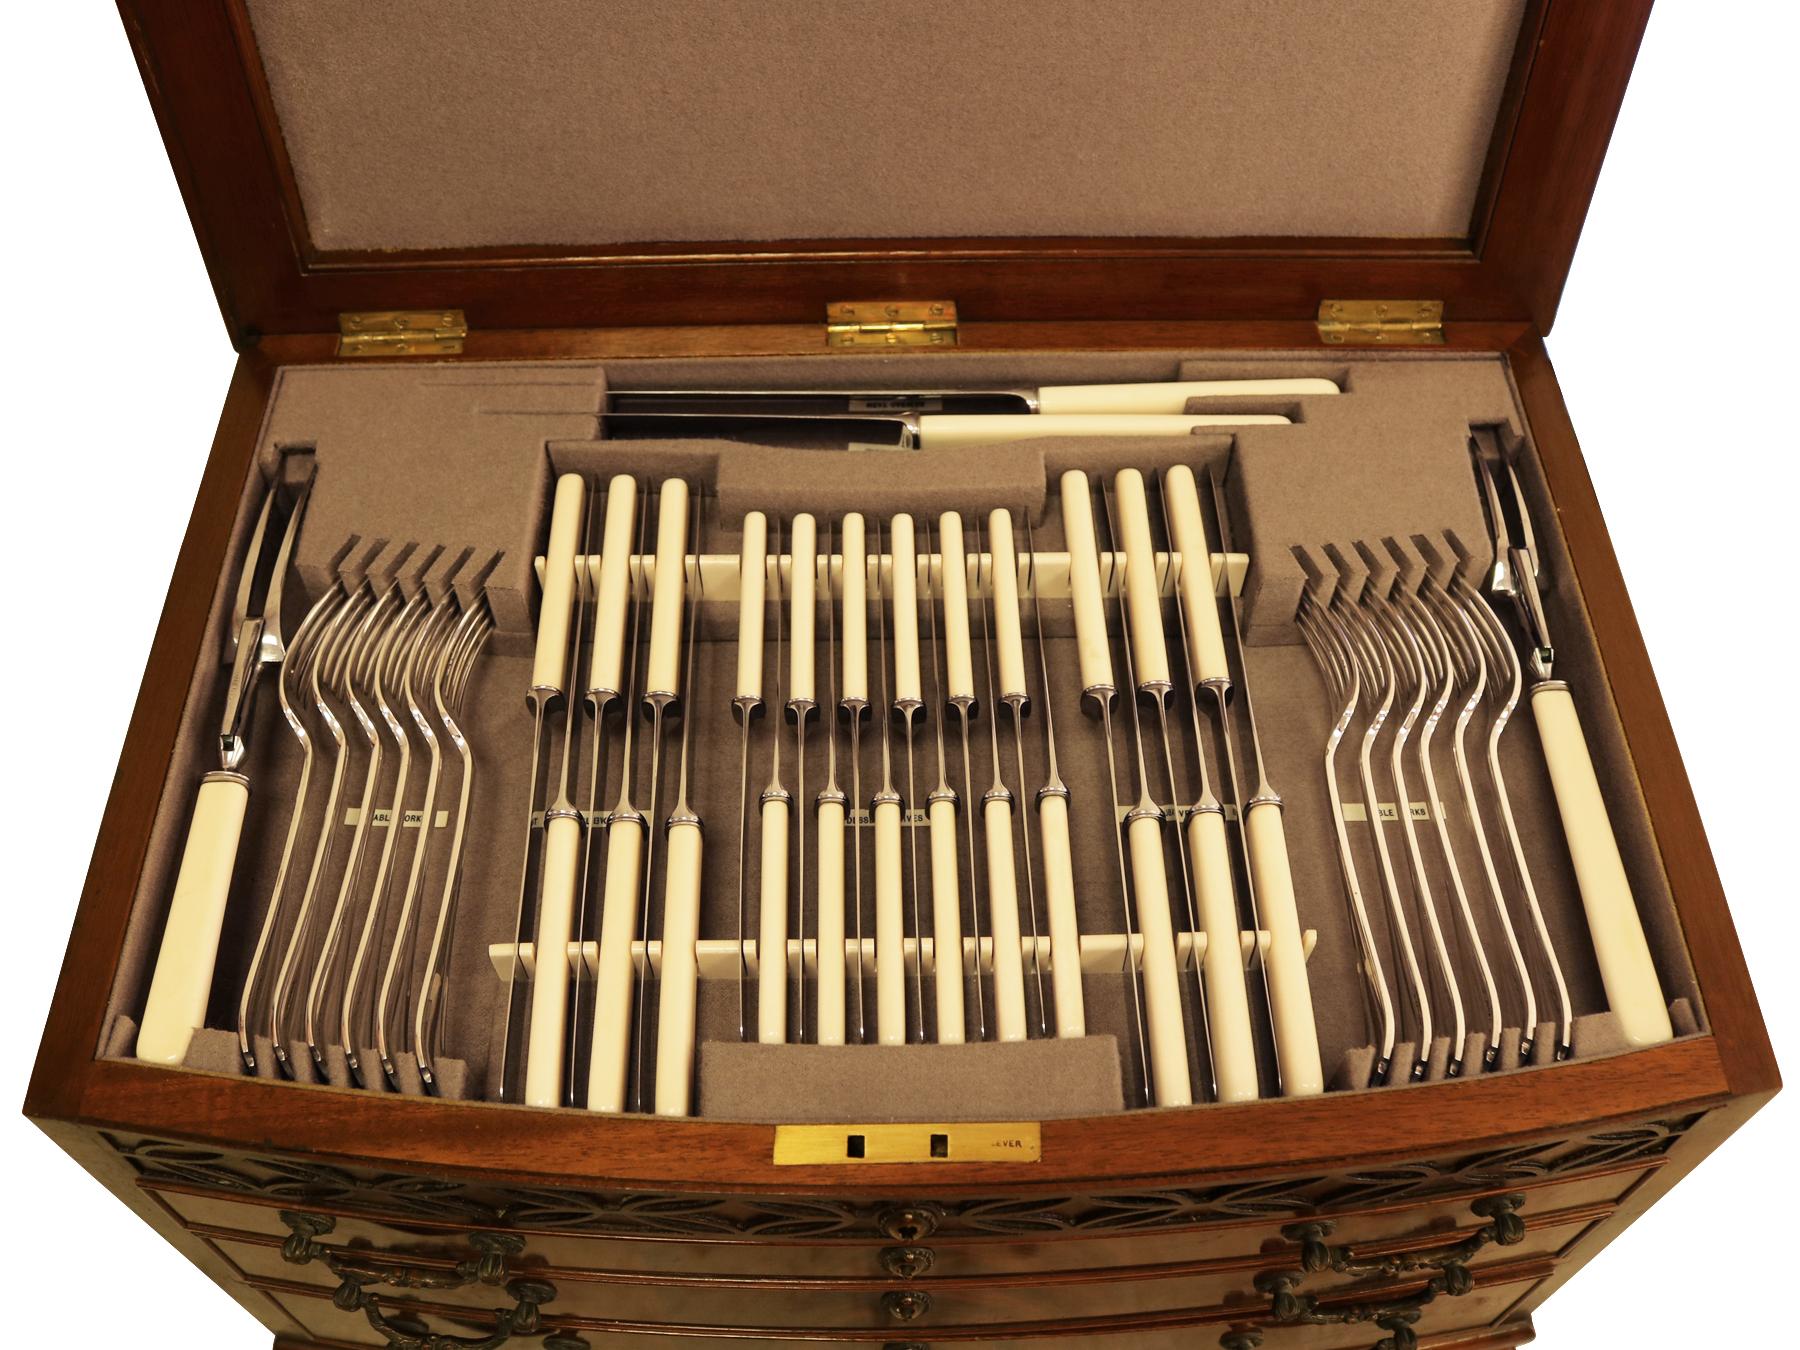 An exceptional, fine and impressive, comprehensive antique English sterling silver Windsor I pattern flatware service for twelve persons - mahogany boxed; an addition to our canteen of cutlery collection.

The pieces of this impressive, antique